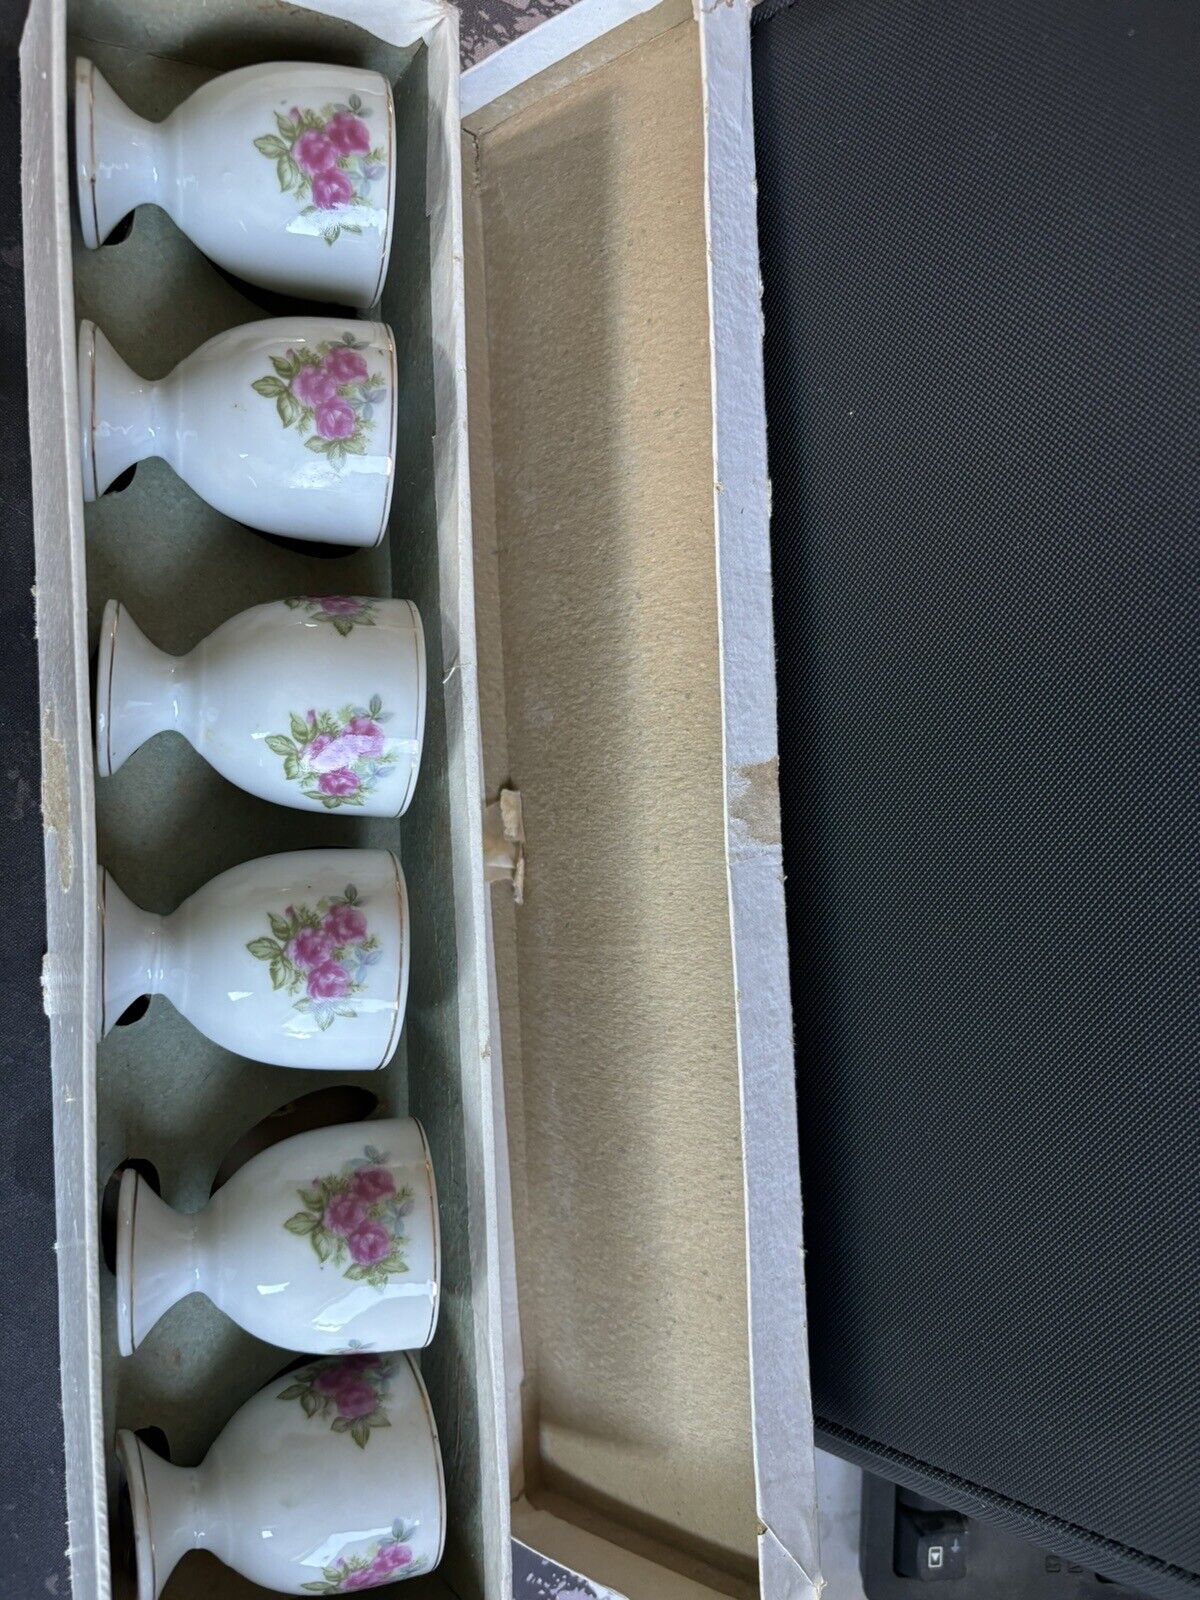 Six Gorgeous Thin and Delicate Porcelain Made in Japan Egg Cups